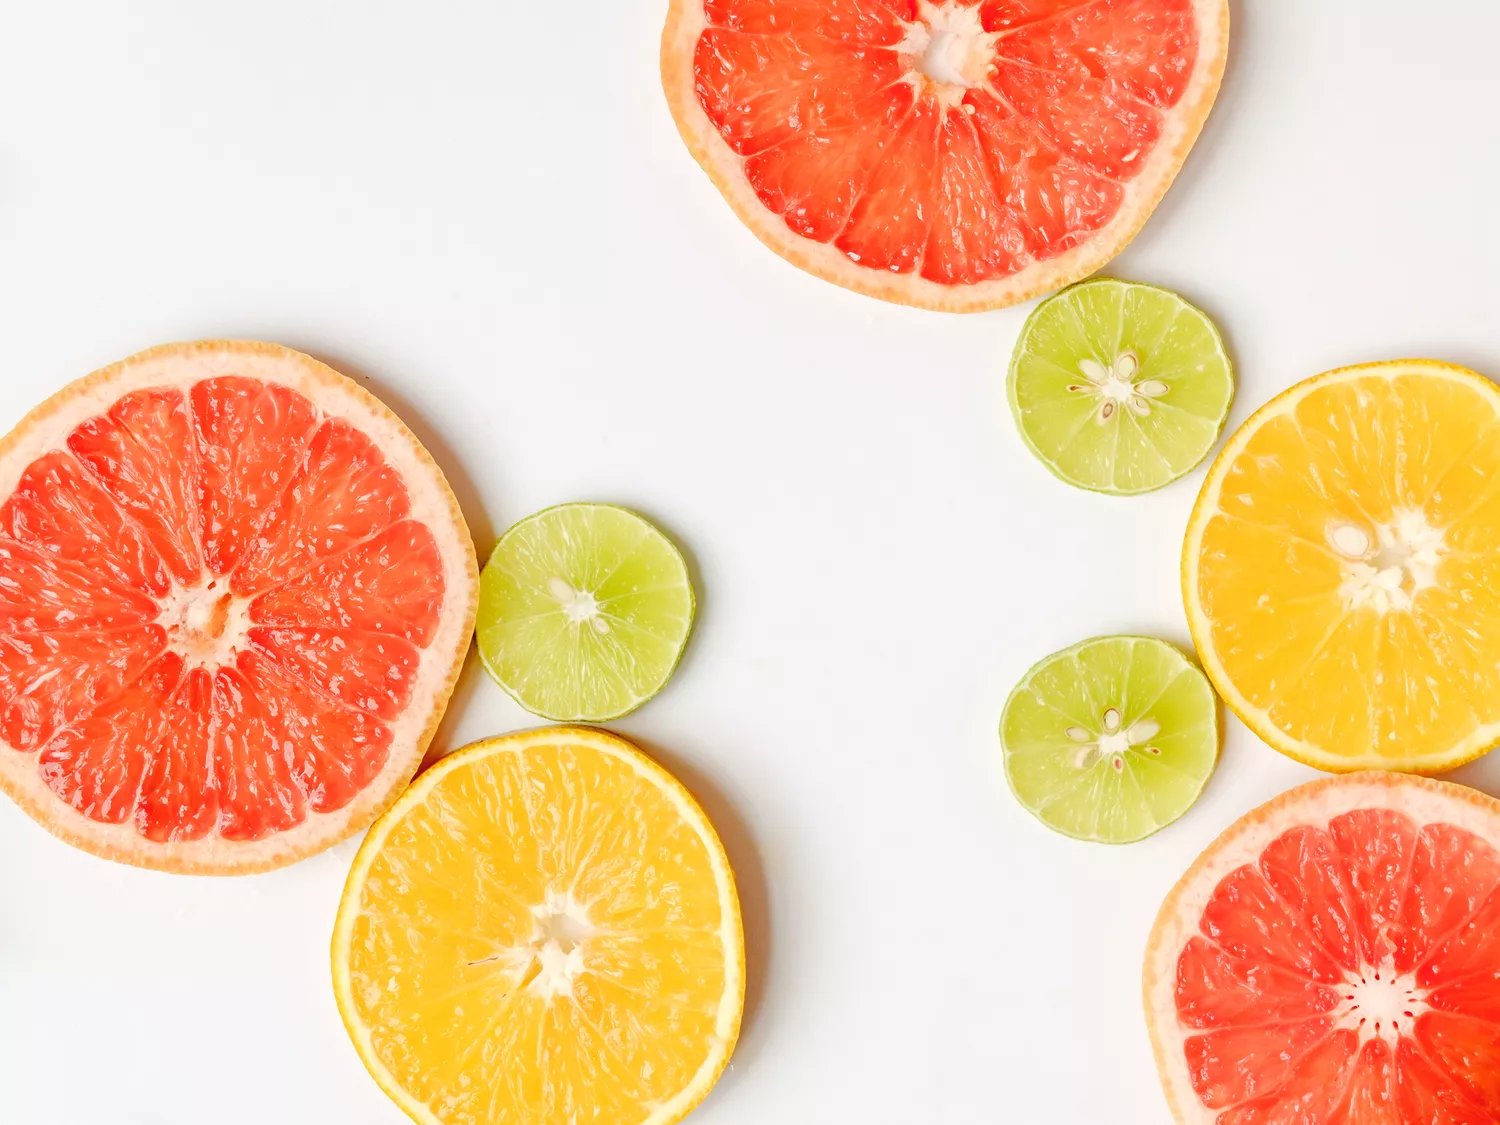 Close-up image of citrus fruit slices (grapefruit, lime, and orange) on a table